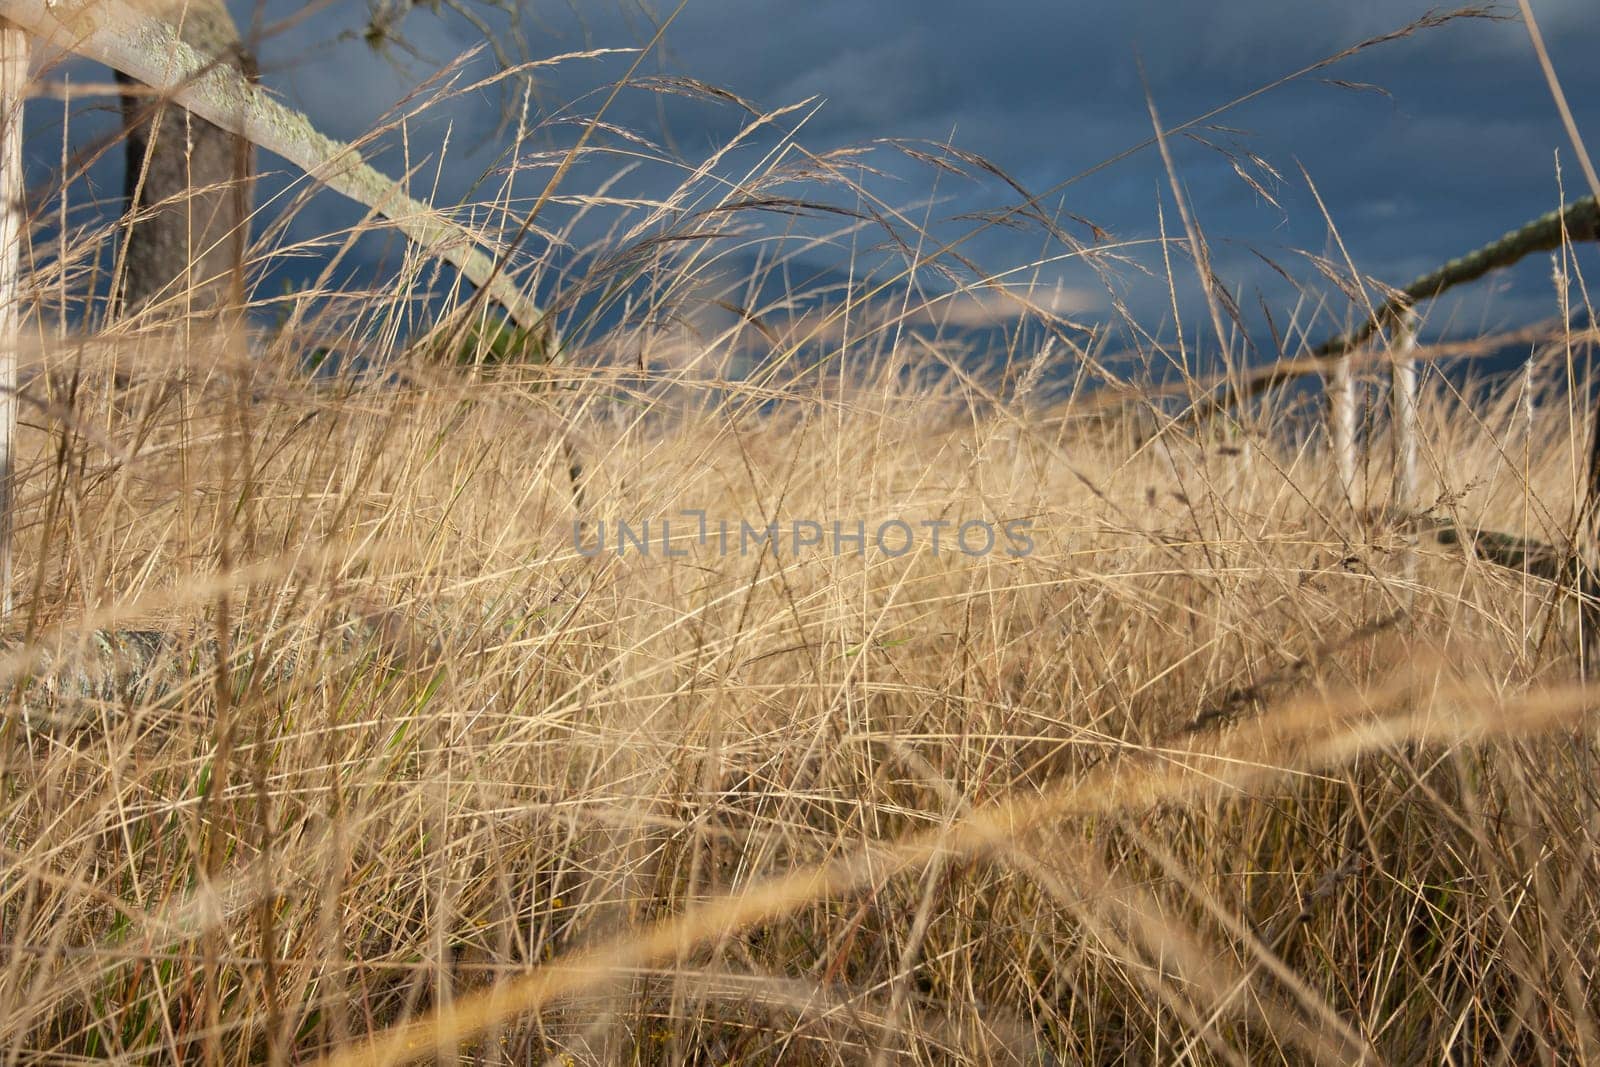 path in a meadow with dry grass and a blue sky in the background. the road has some wood on the sides